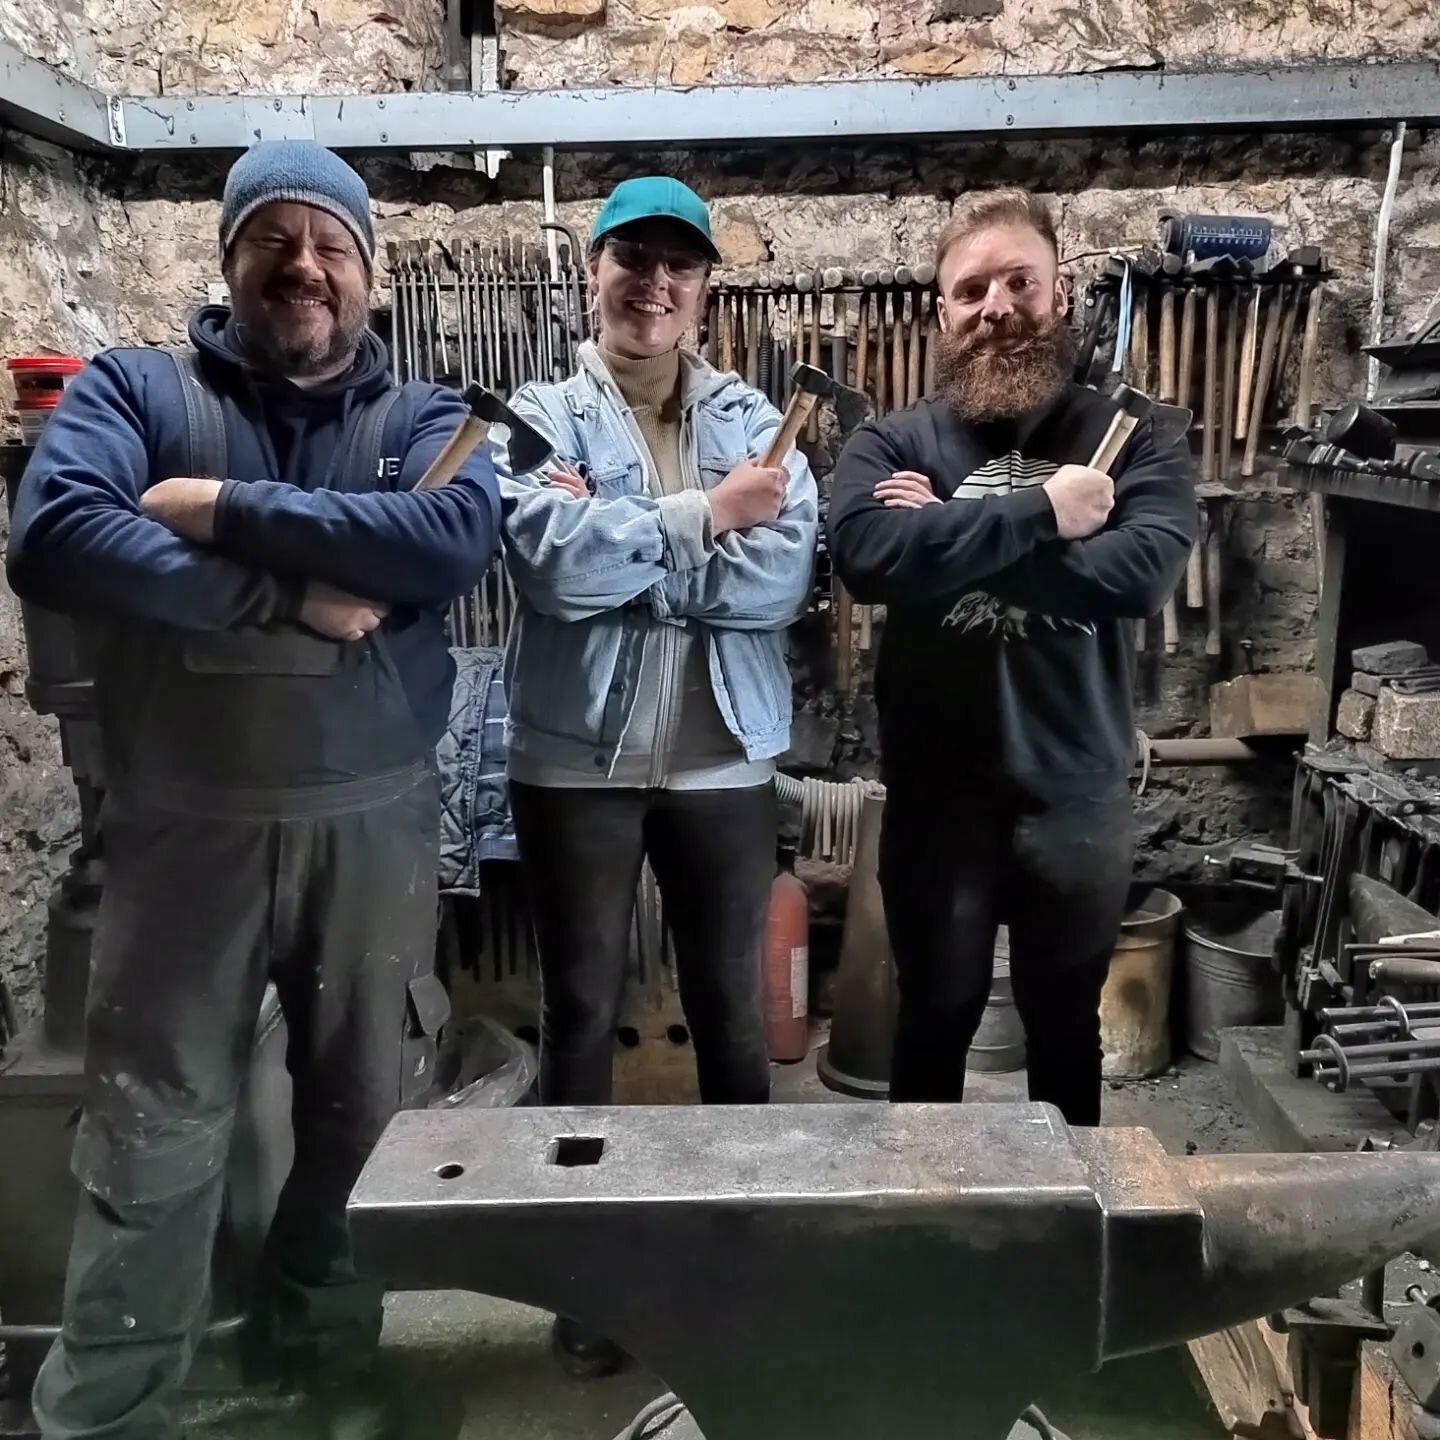 Dear friends of the forge,

If you are still looking for a great present for someone near and dear then why not have a look at the excellent courses on offer here at the forge.

Our most popular courses are the &quot;blacksmith experience&quot; and o